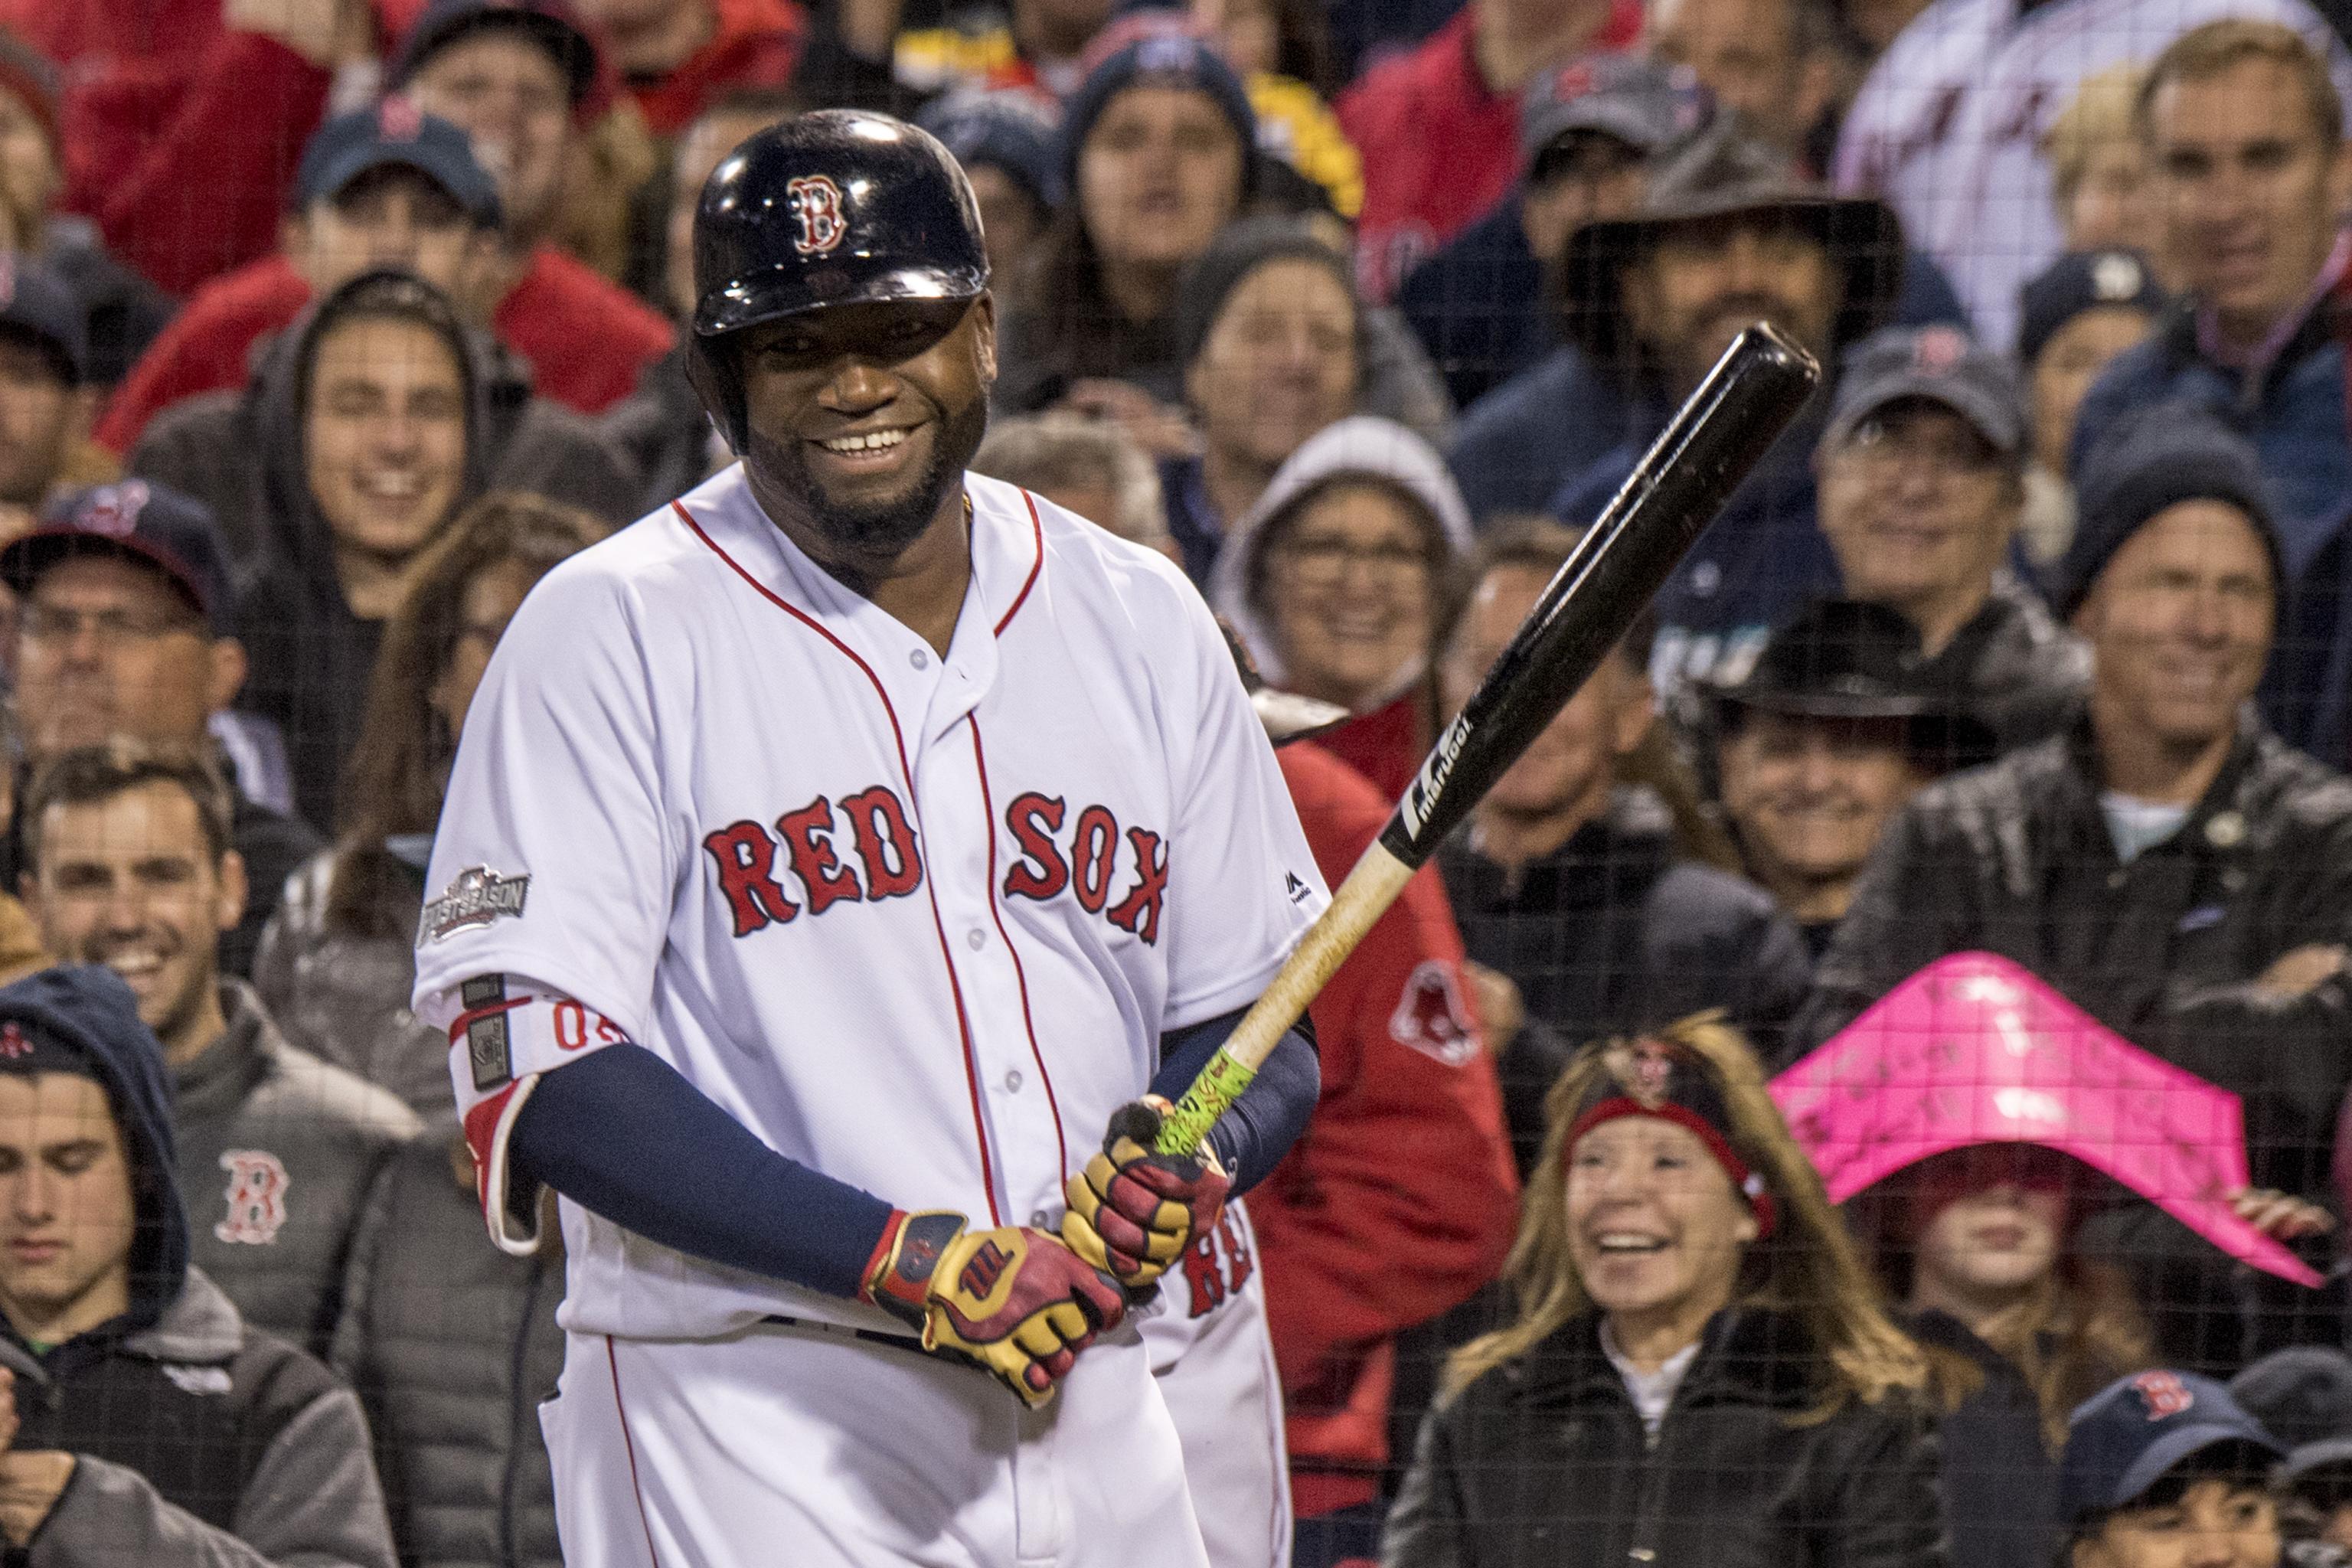 David Ortiz will have his No. 34 jersey retired by the Red Sox in